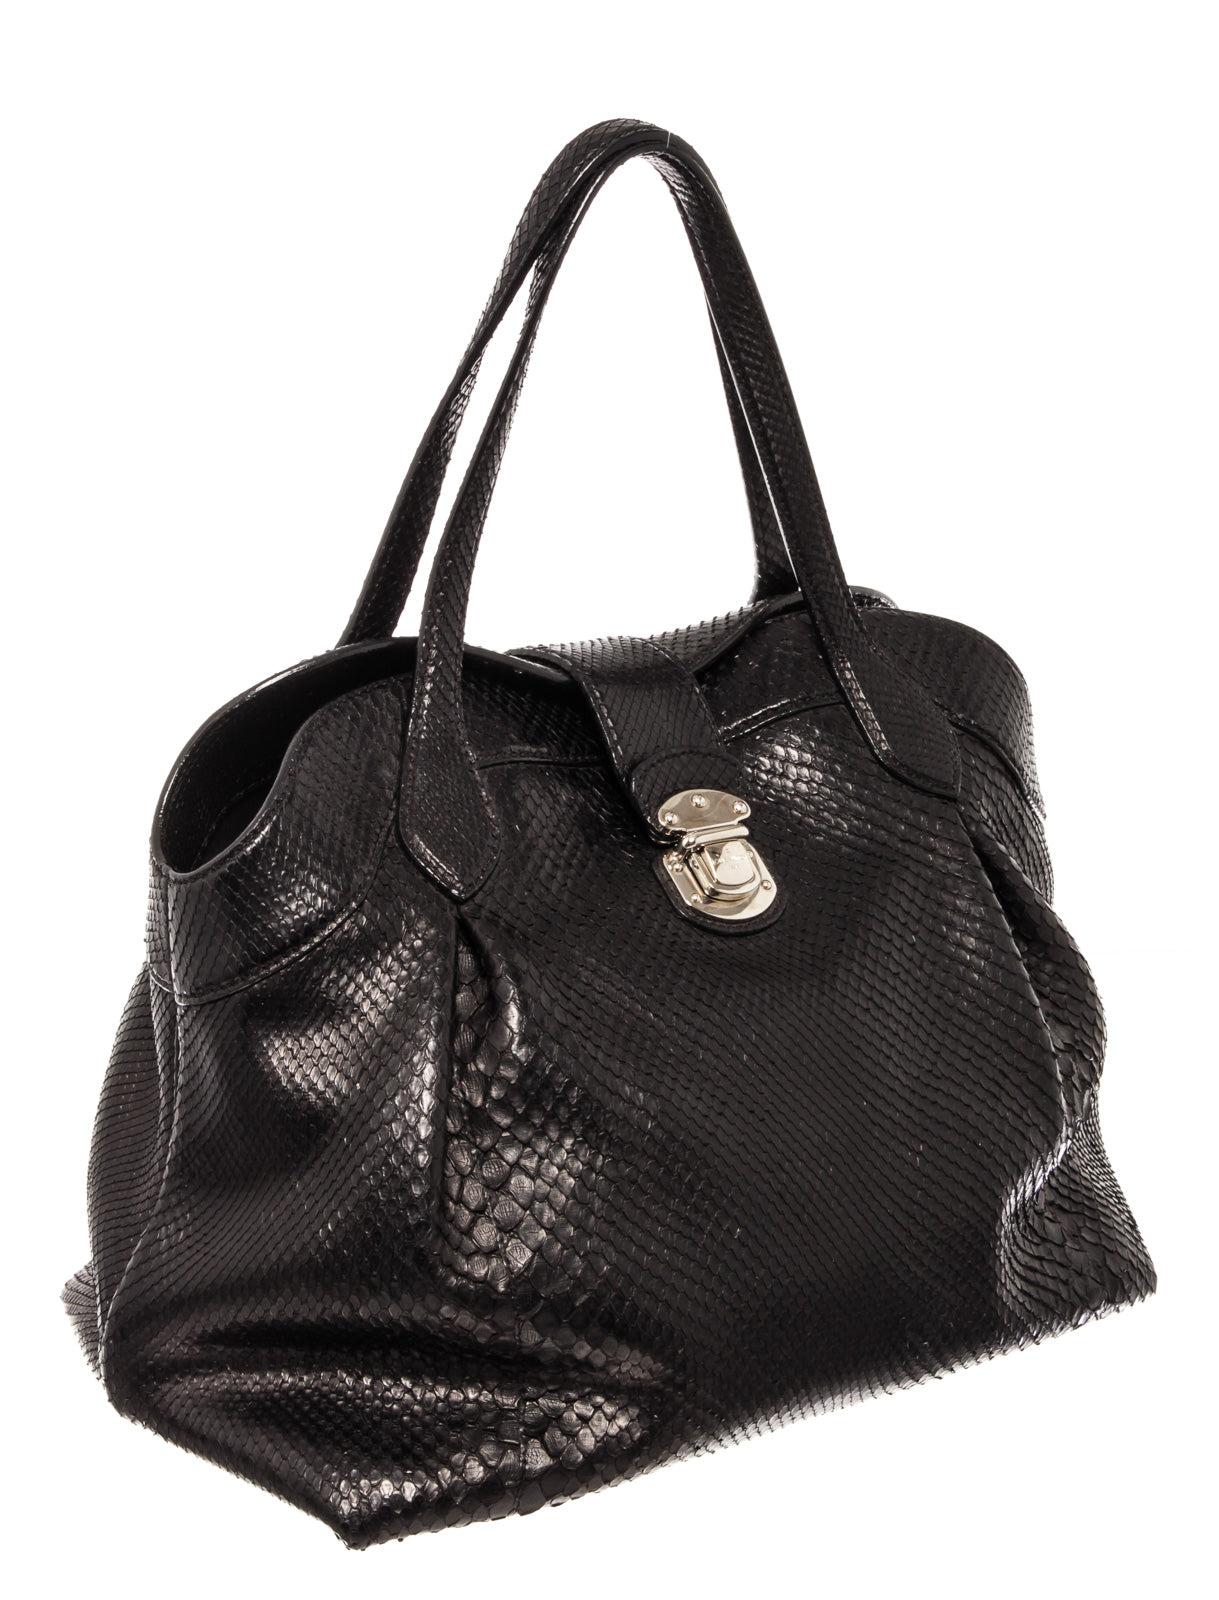 Louis Vuitton Cirrus MM Shoulder Bag is made of the finest black Python leather. This doctor frame bag features silver-tone hardware, one zip side pocket, four protective stud accents, a top buckle and press lock closure. Its press-lock closure